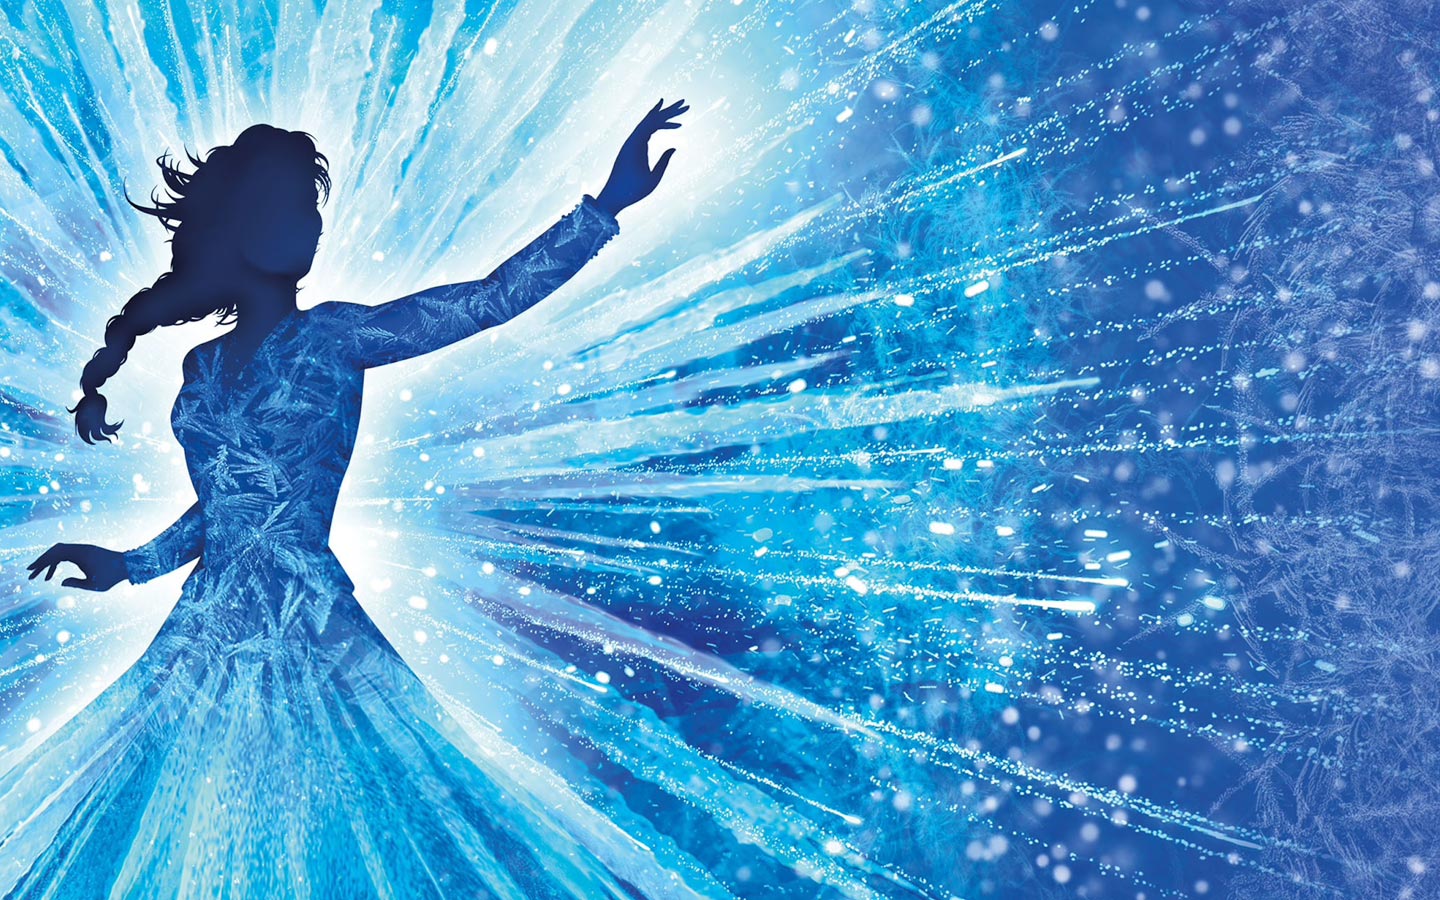 Frozen The Musical comes to London